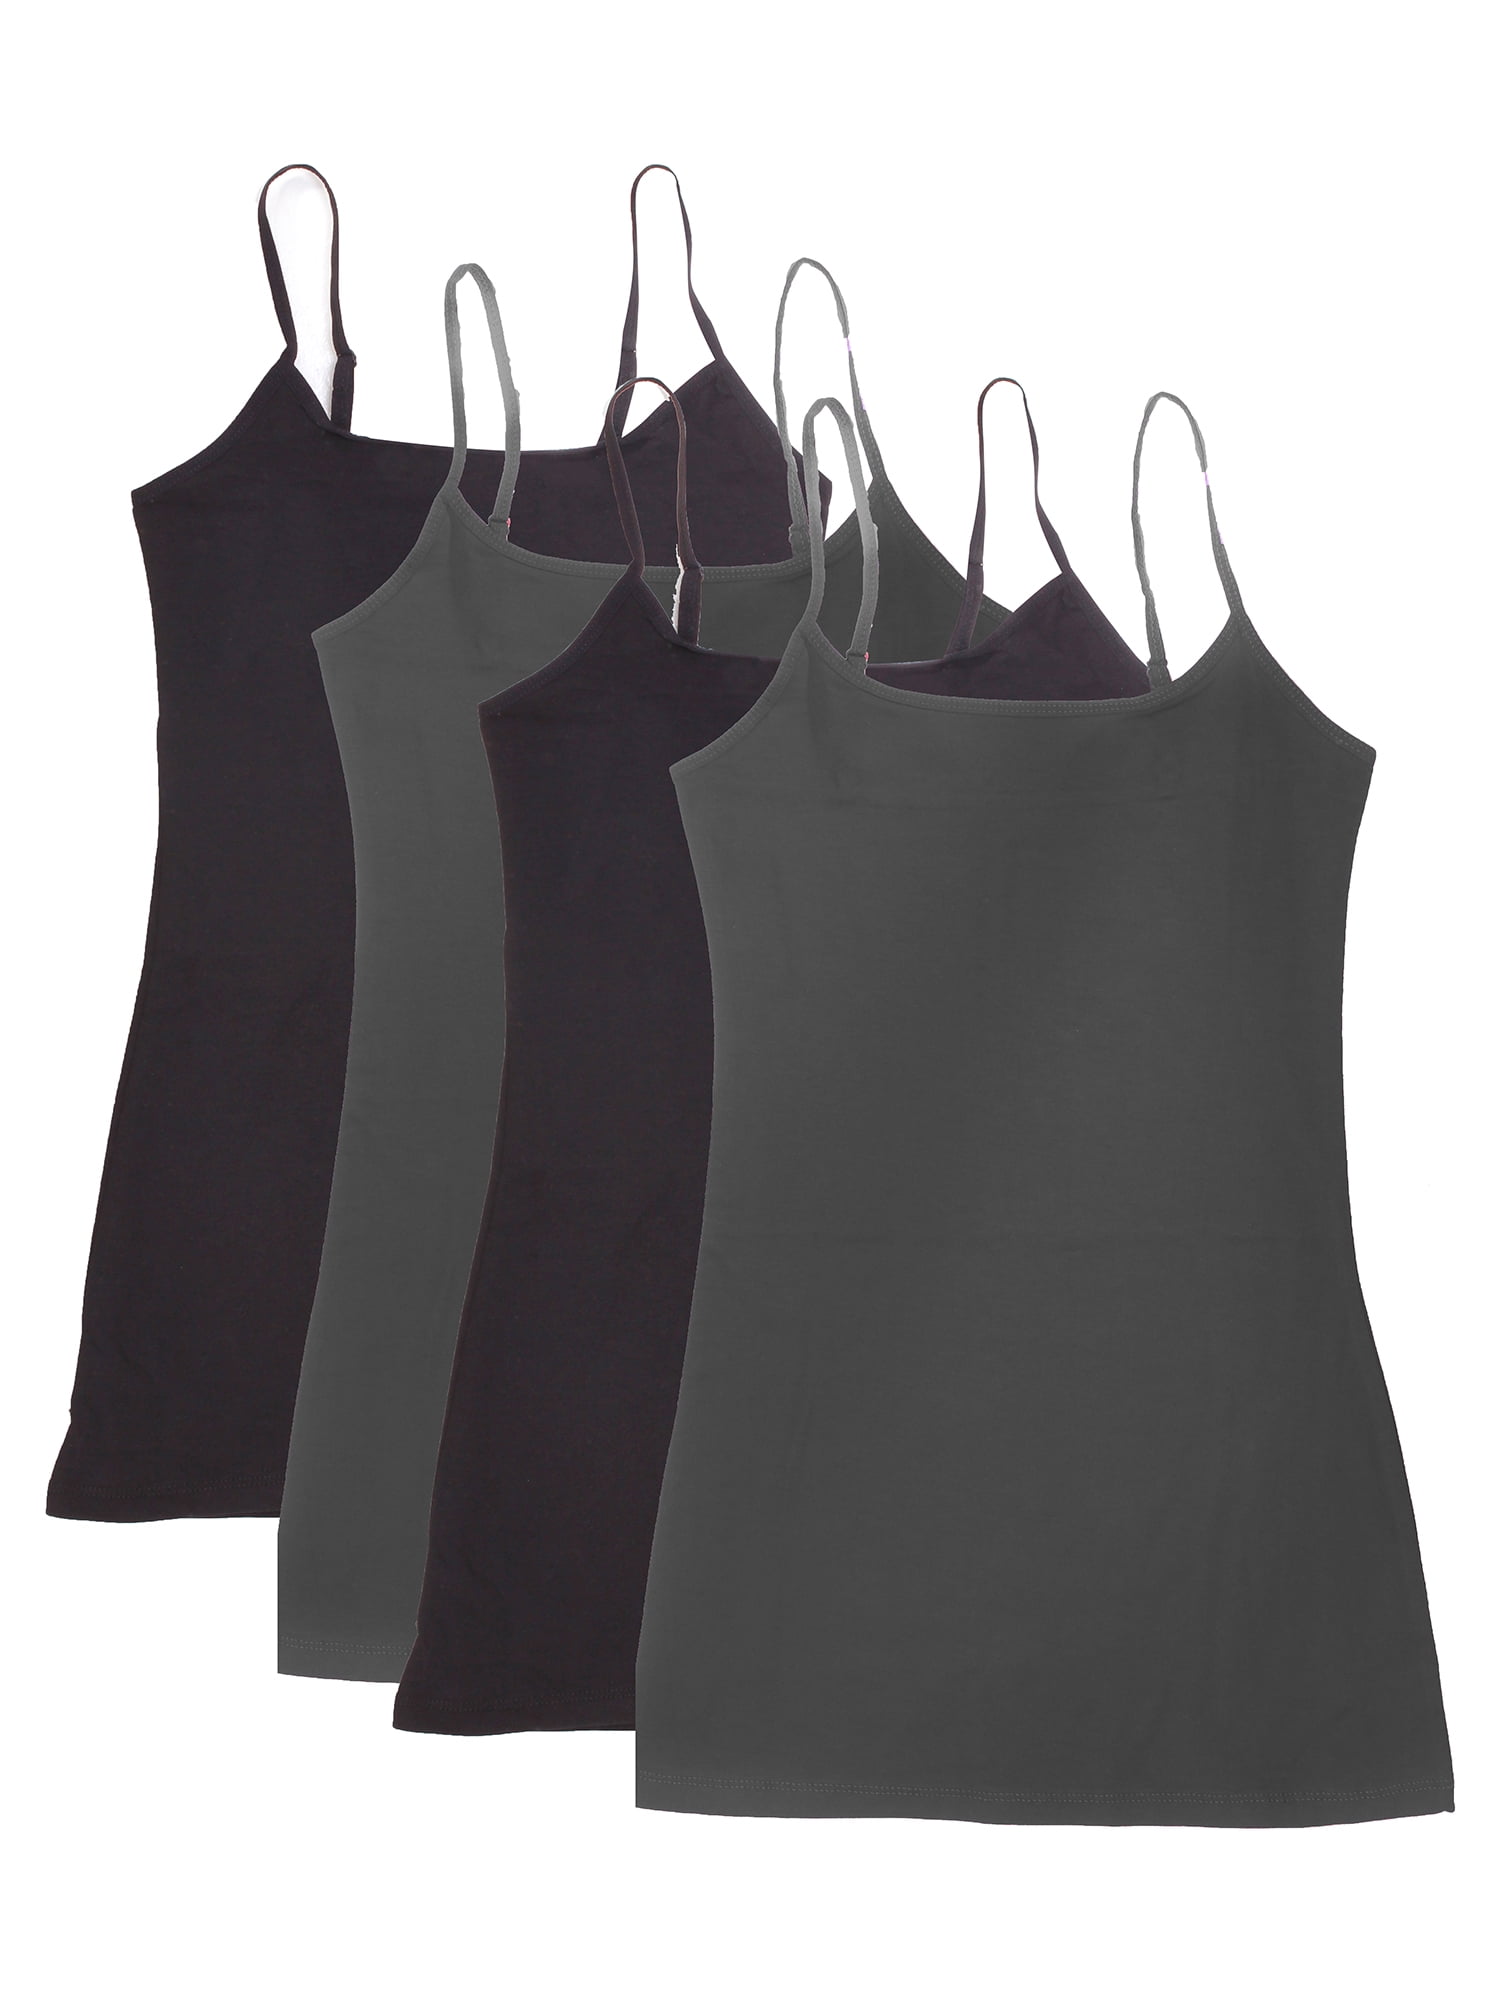 Essential Basic Women Value Pack Long Camisole Cami - Black, Black,  Charcoal, Charcoal, Small